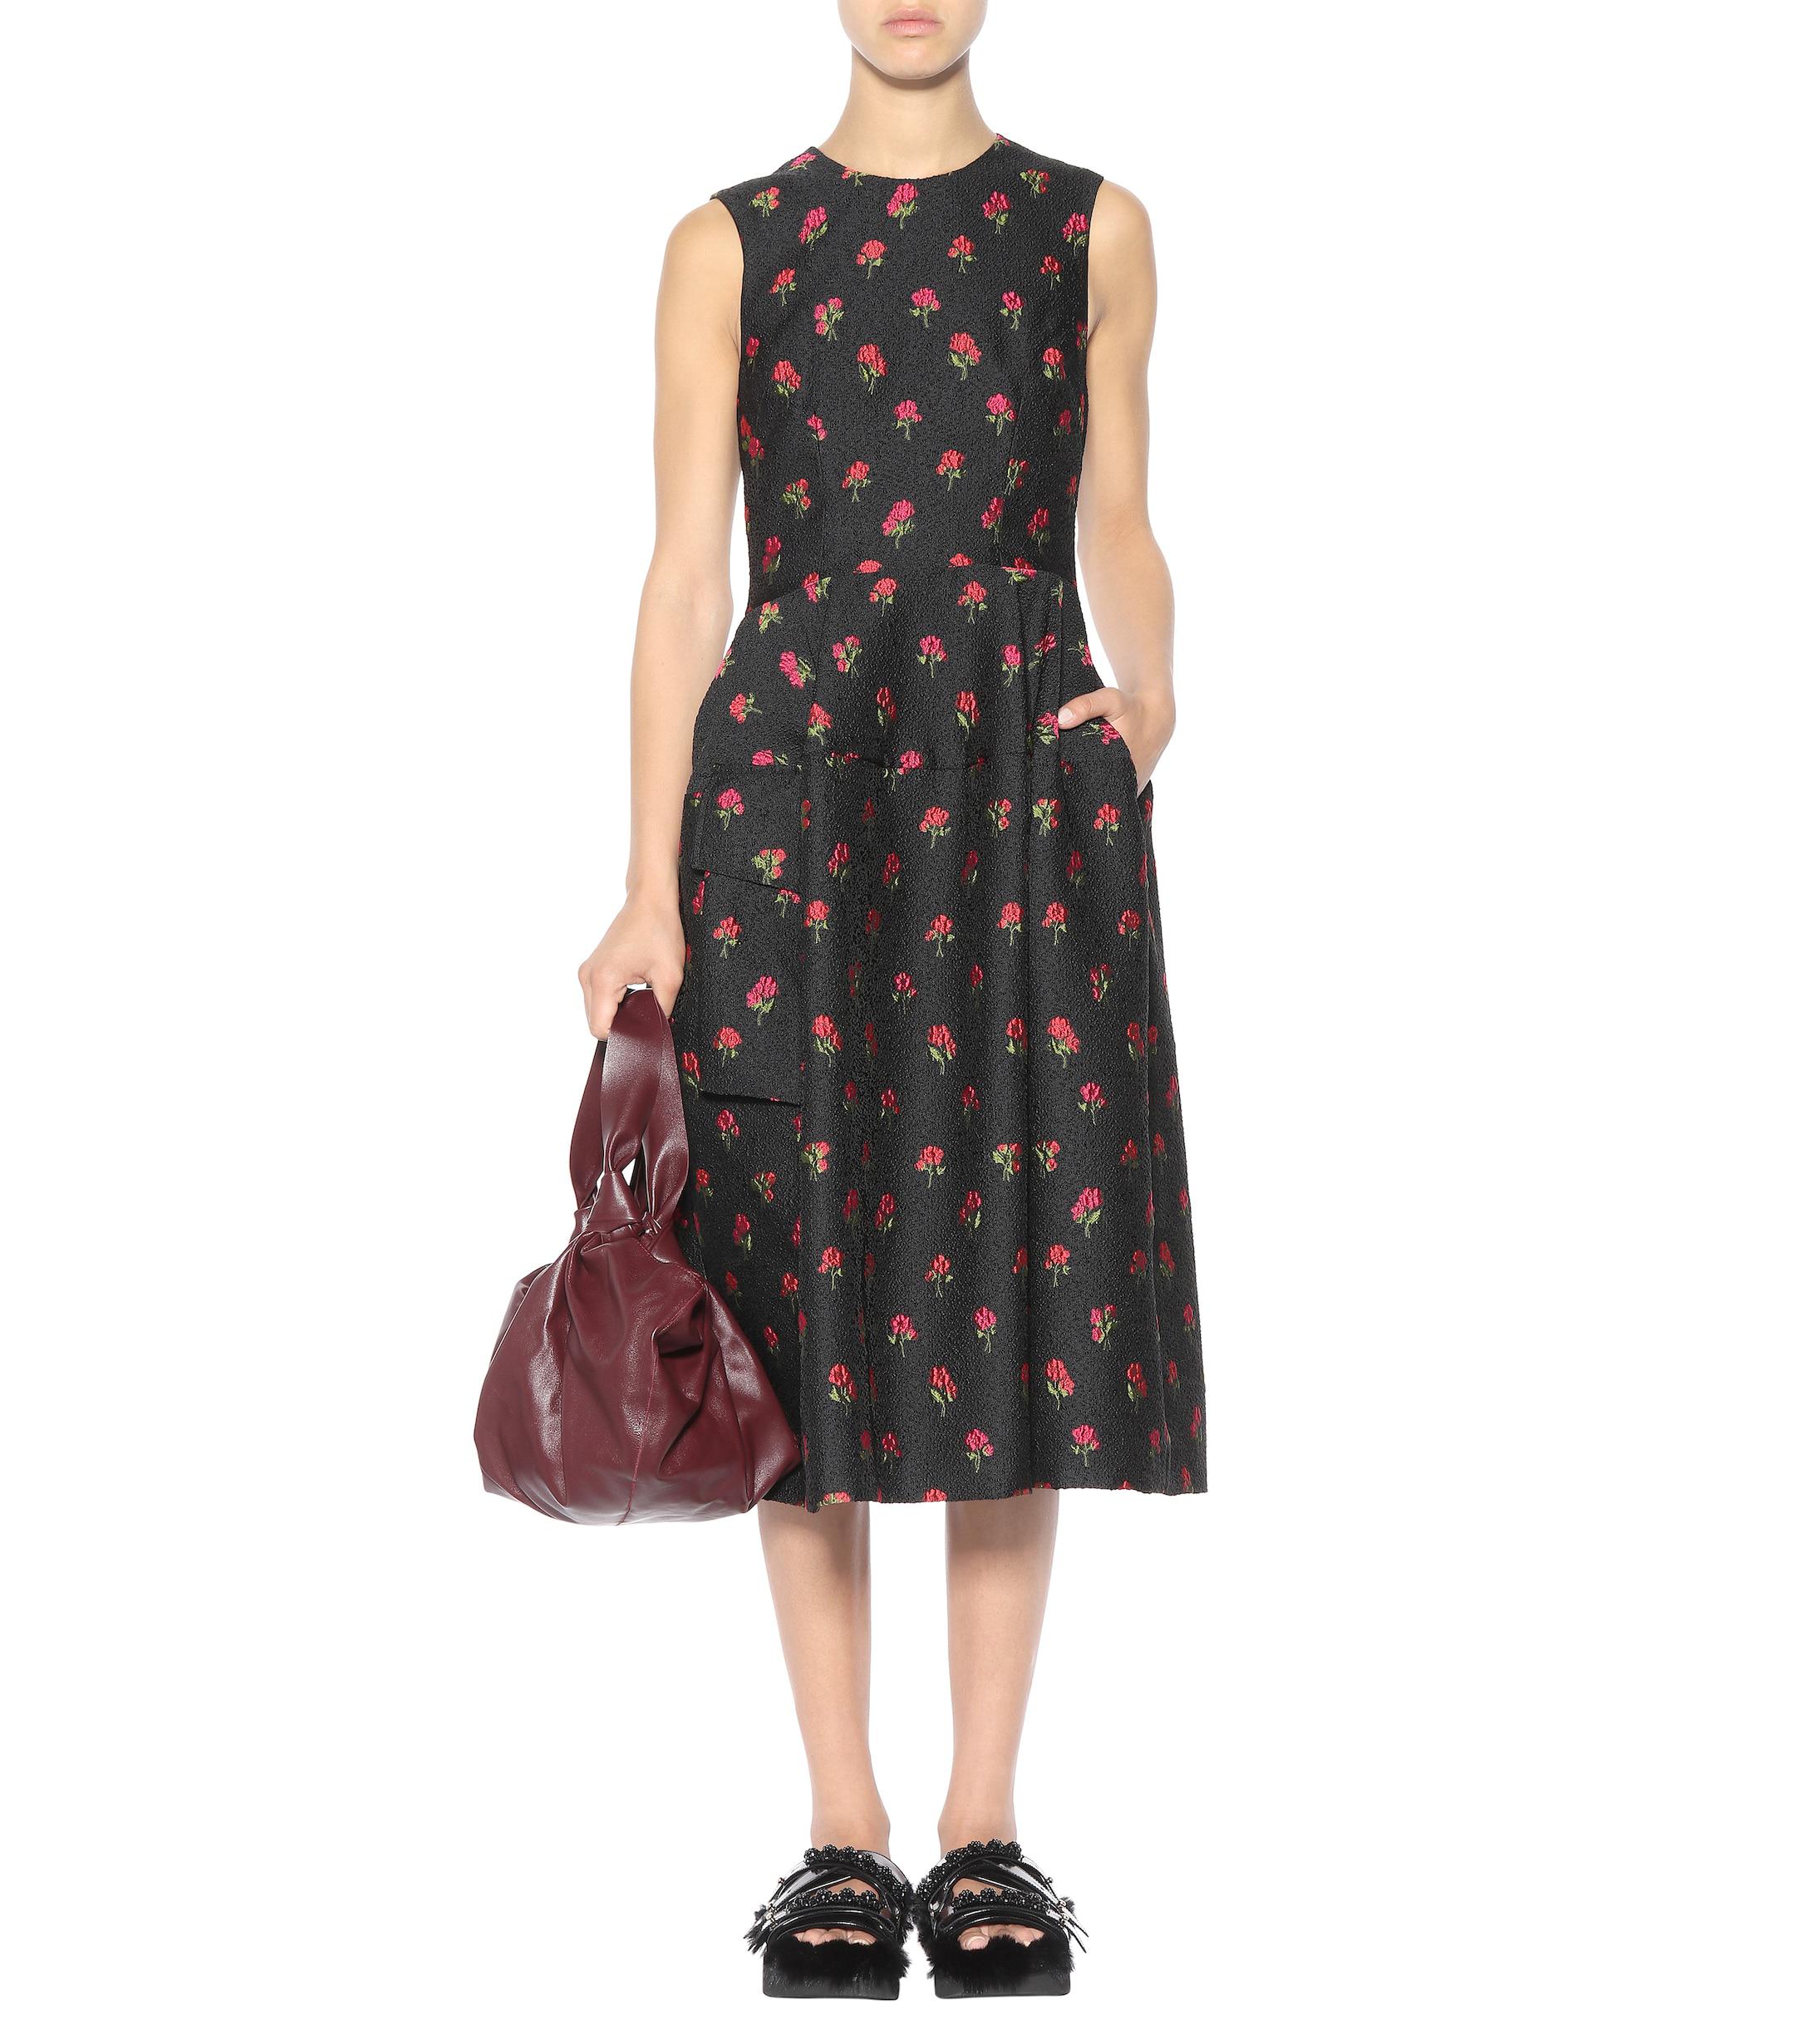 black dress with red embroidered flowers